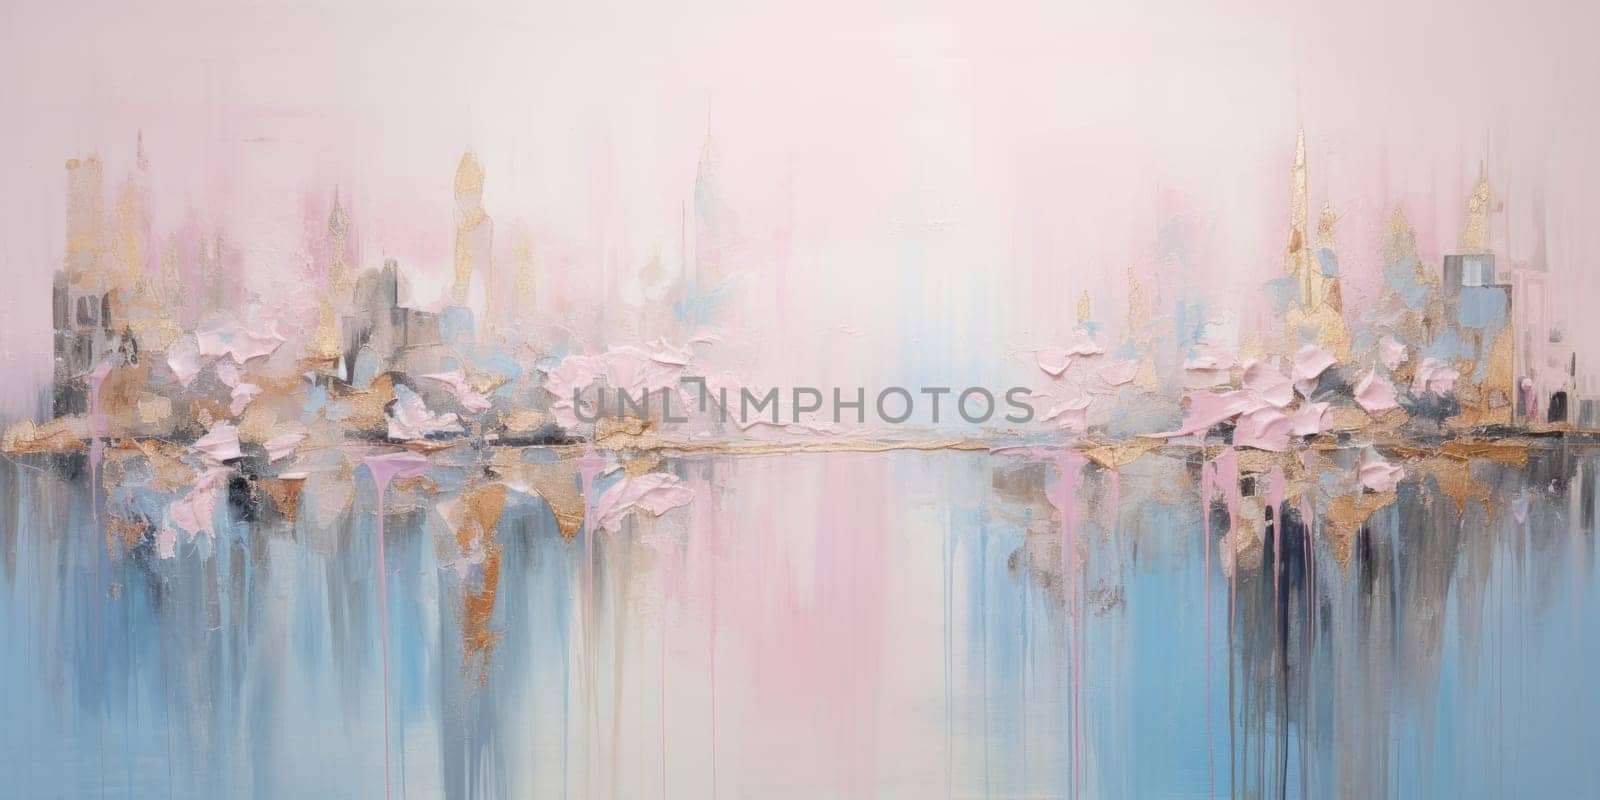 An abstract picture of gold, pink and blue color painted on background. AIGX01. by biancoblue